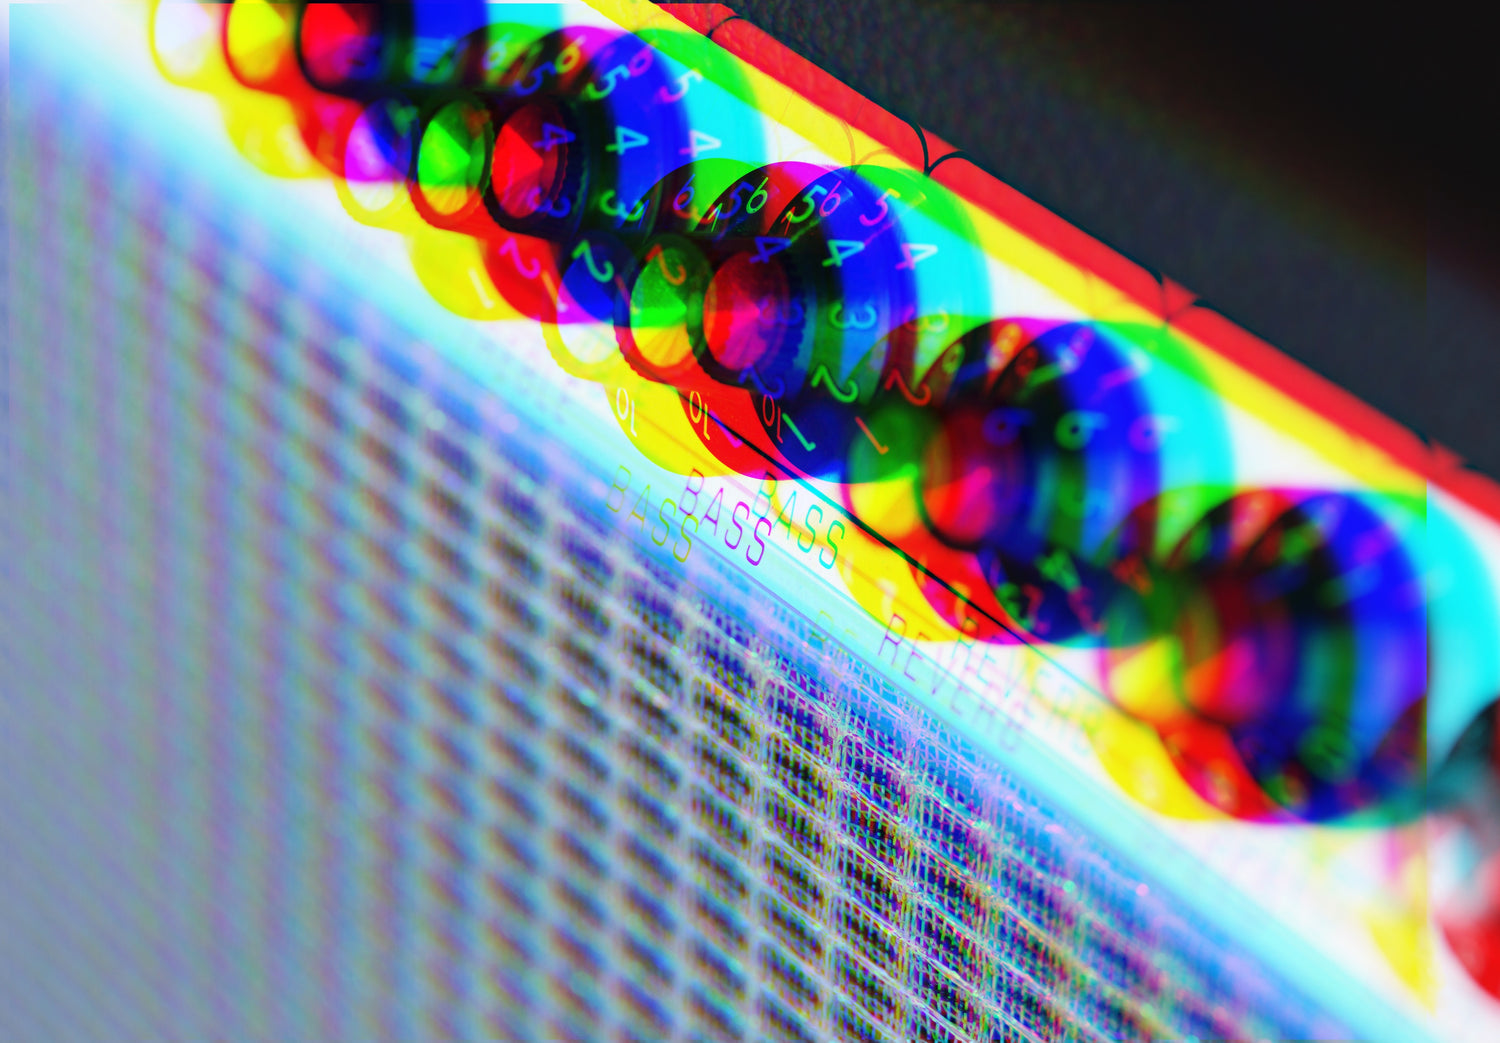 Close-up photograph of a guitar amplifier's bass and reverb knobs with heavy chromatic aberration giving it a colorful, abstract appearance.